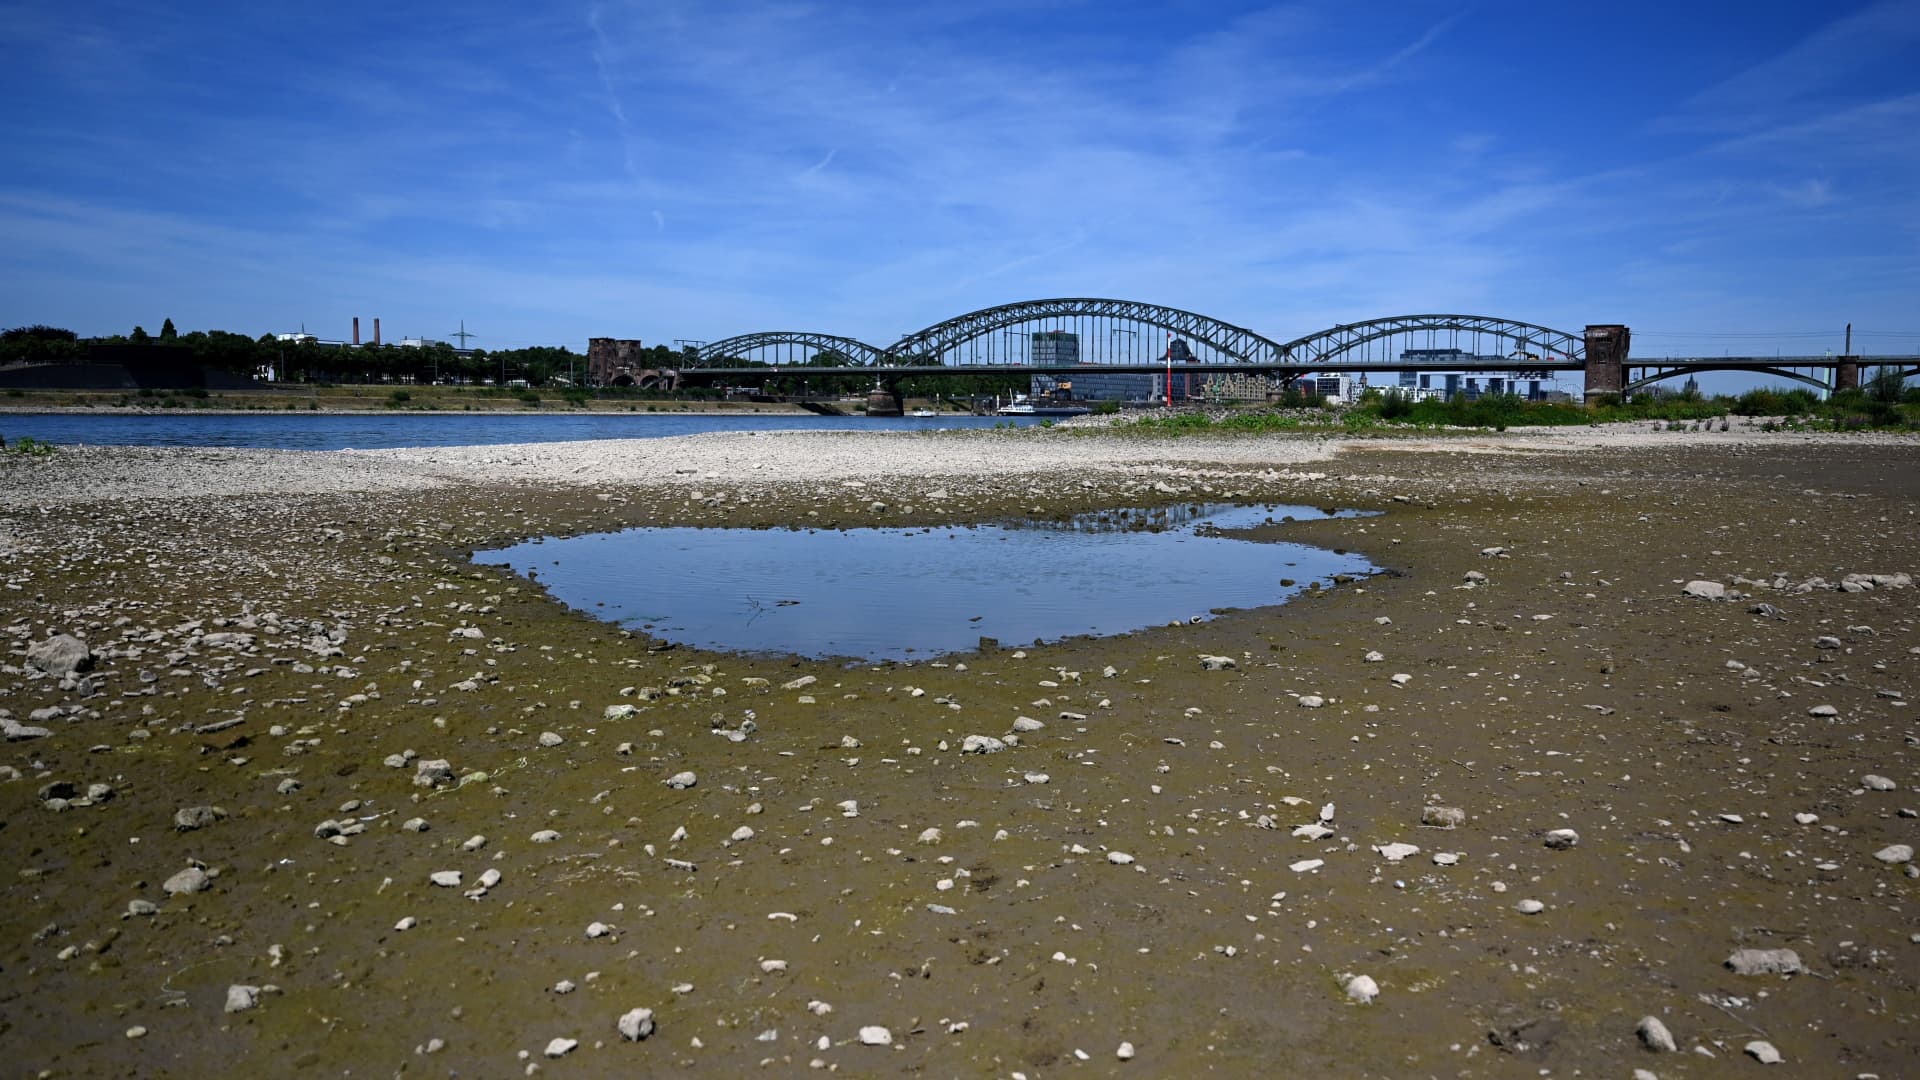 A photo taken on July 18, 2022 shows a puddle of water amid the nearly dried-up river bed of the Rhine in Cologne, western Germany, as many parts of Europe experience a heatwave.